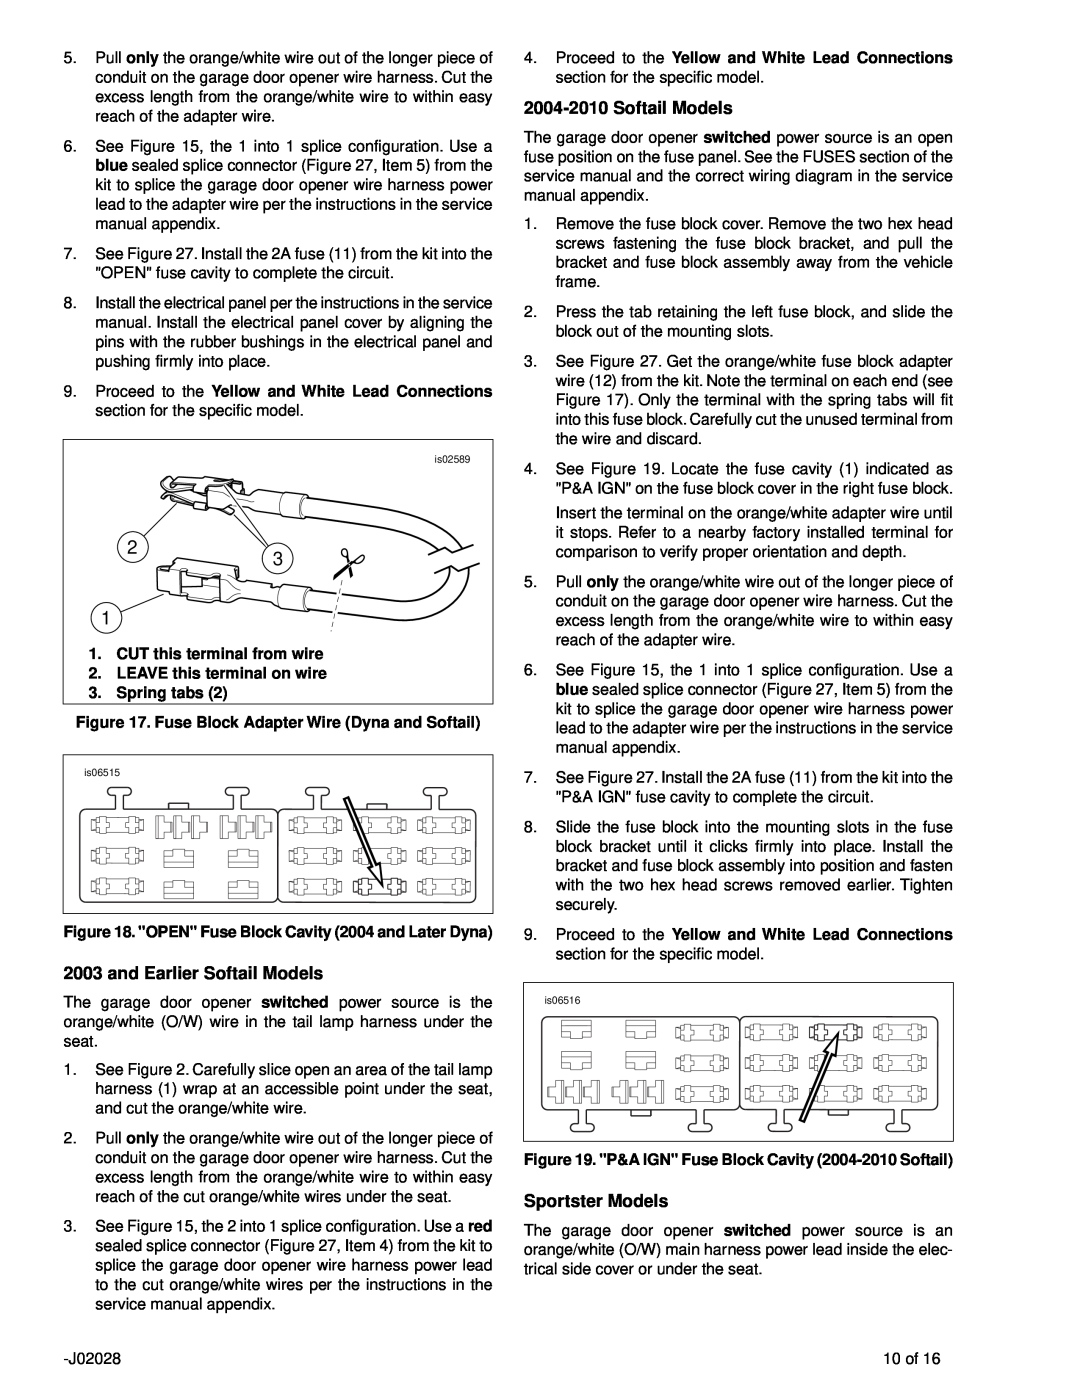 SkyLink 91558-01A, 91561-01, 91562-01 service manual and Earlier Softail Models, 2004-2010Softail Models, Sportster Models 